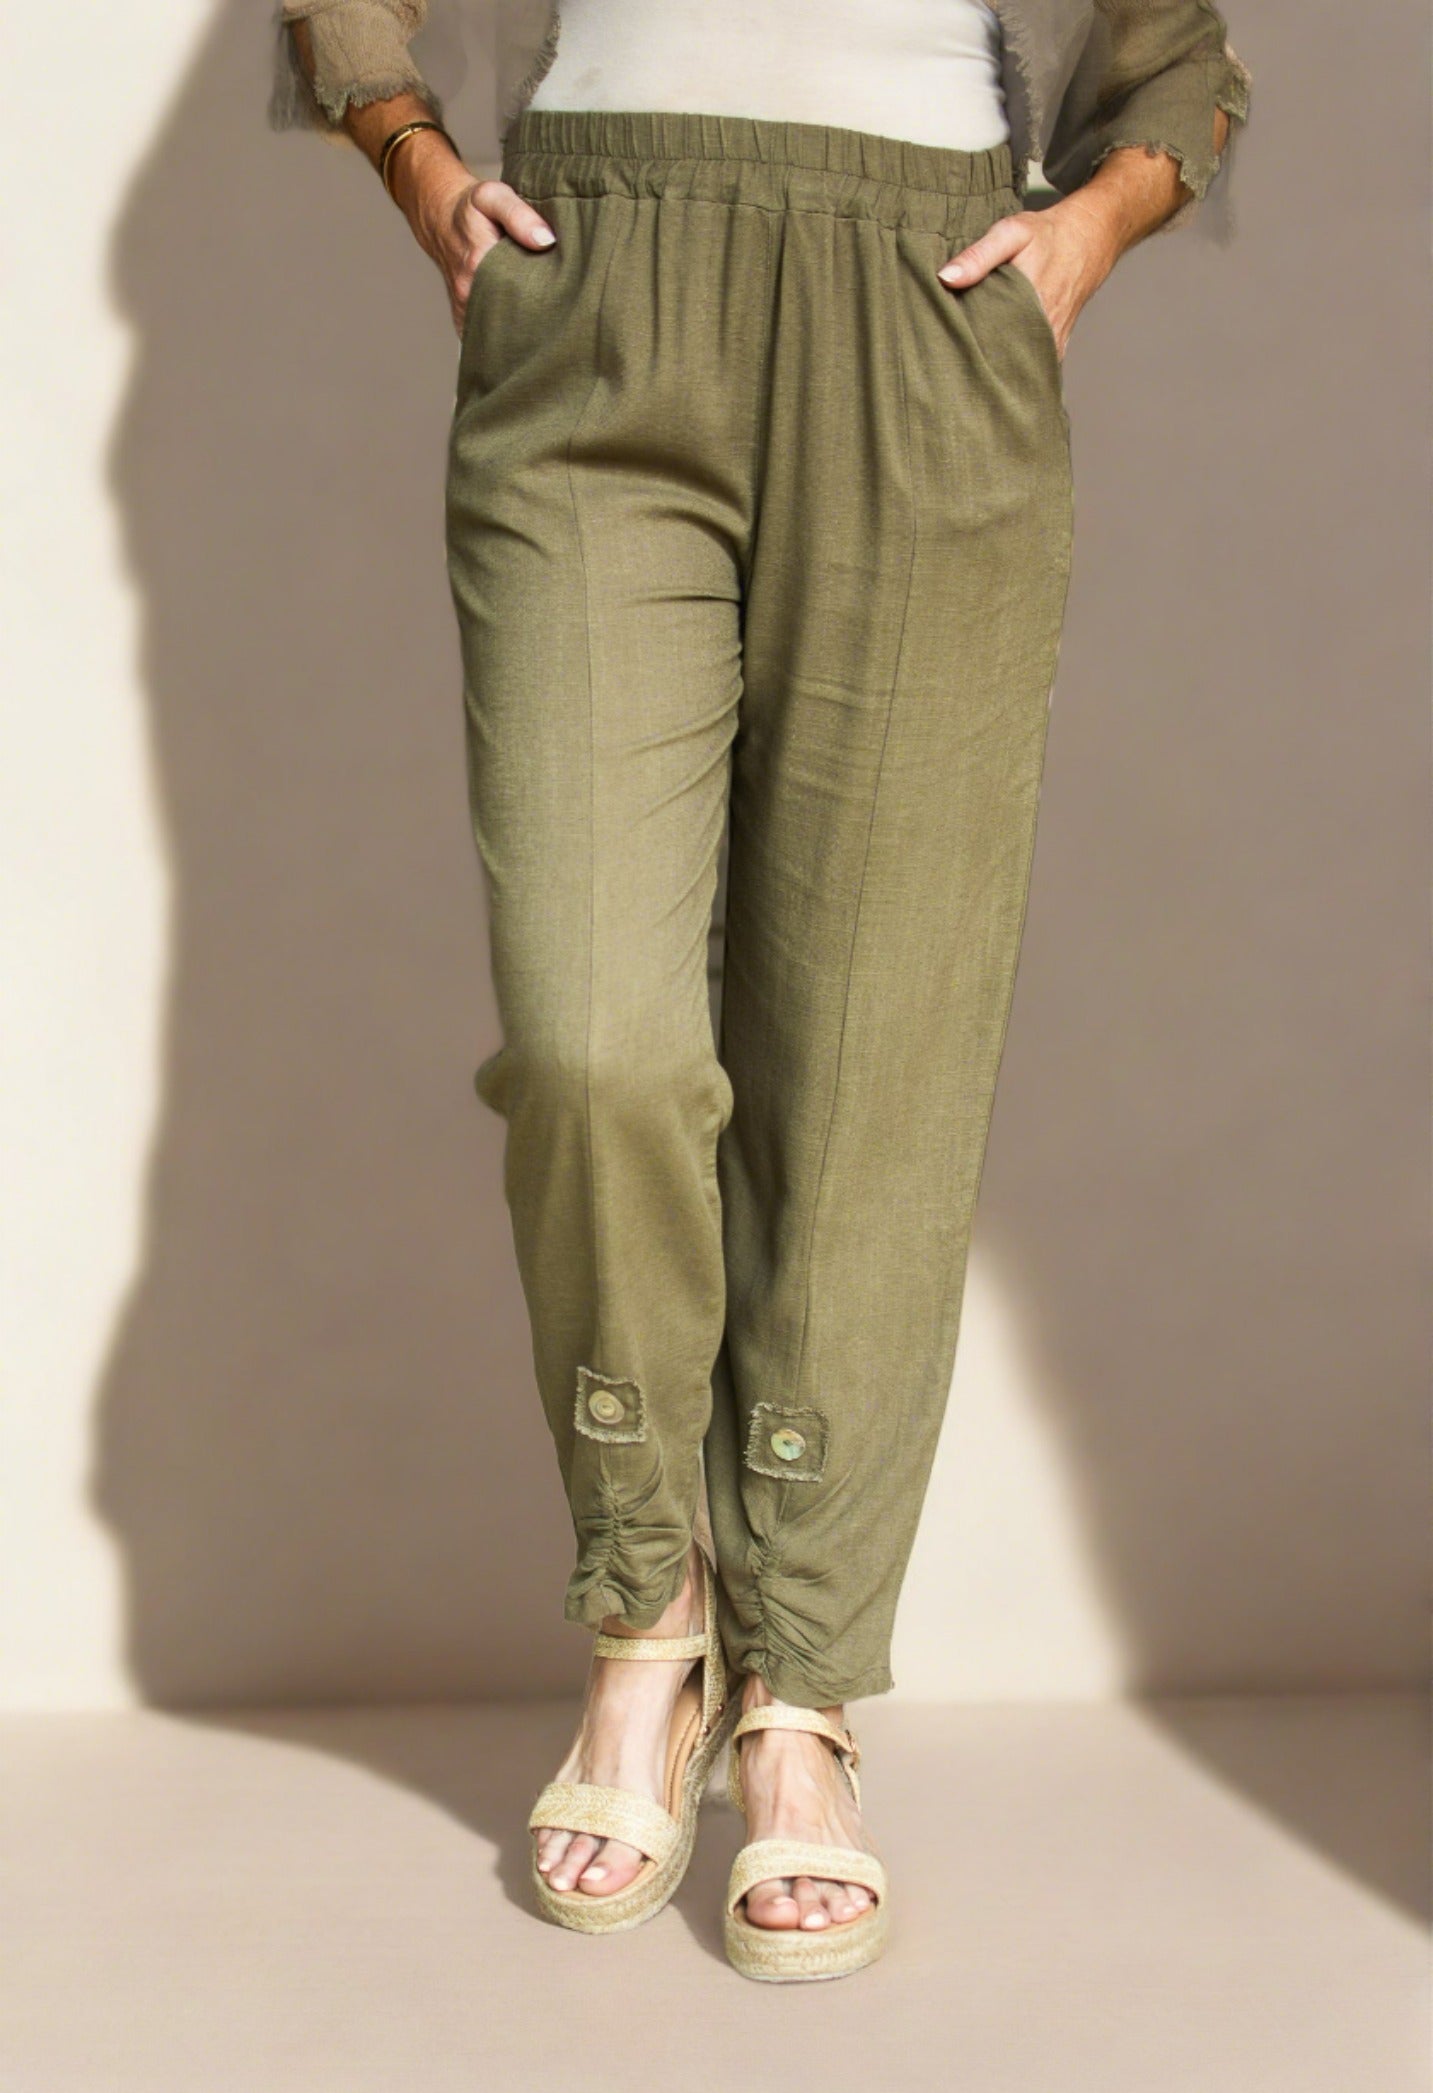 Ladies Khaki Linen Pants with front button detail at bottom